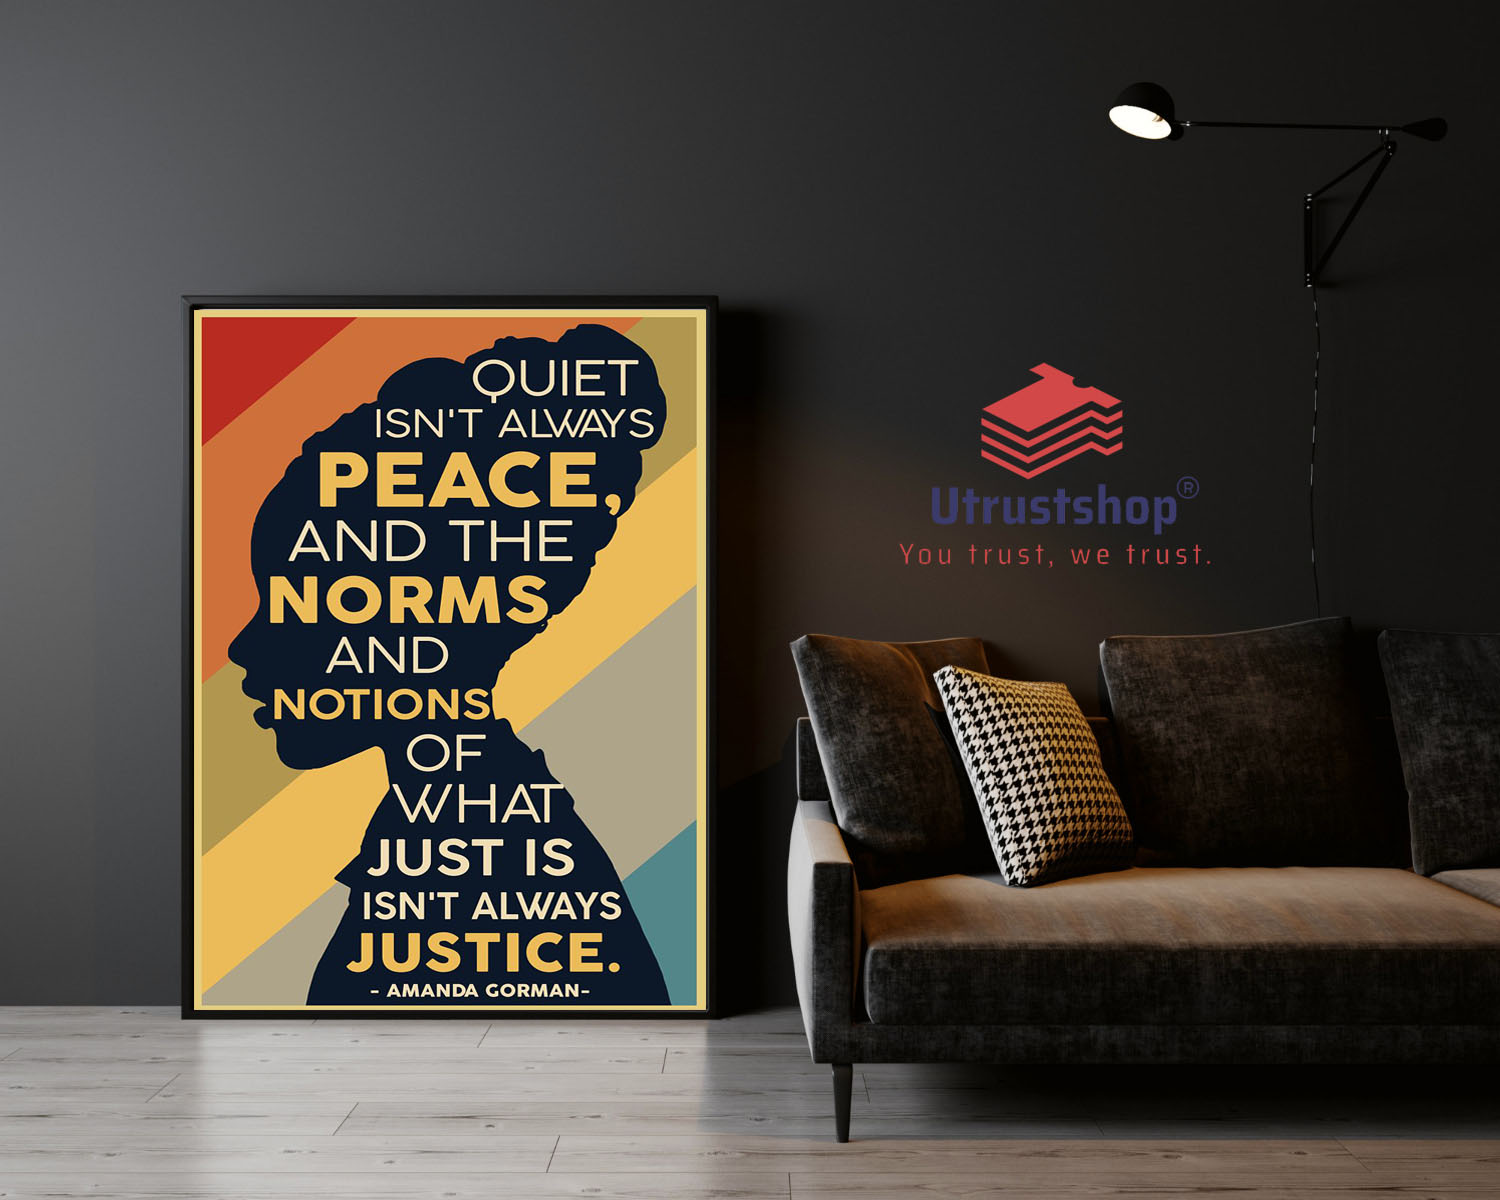 Amanda Gorman Quiet isn't always peace and the norm and notions of what just is isn't always justice poster2